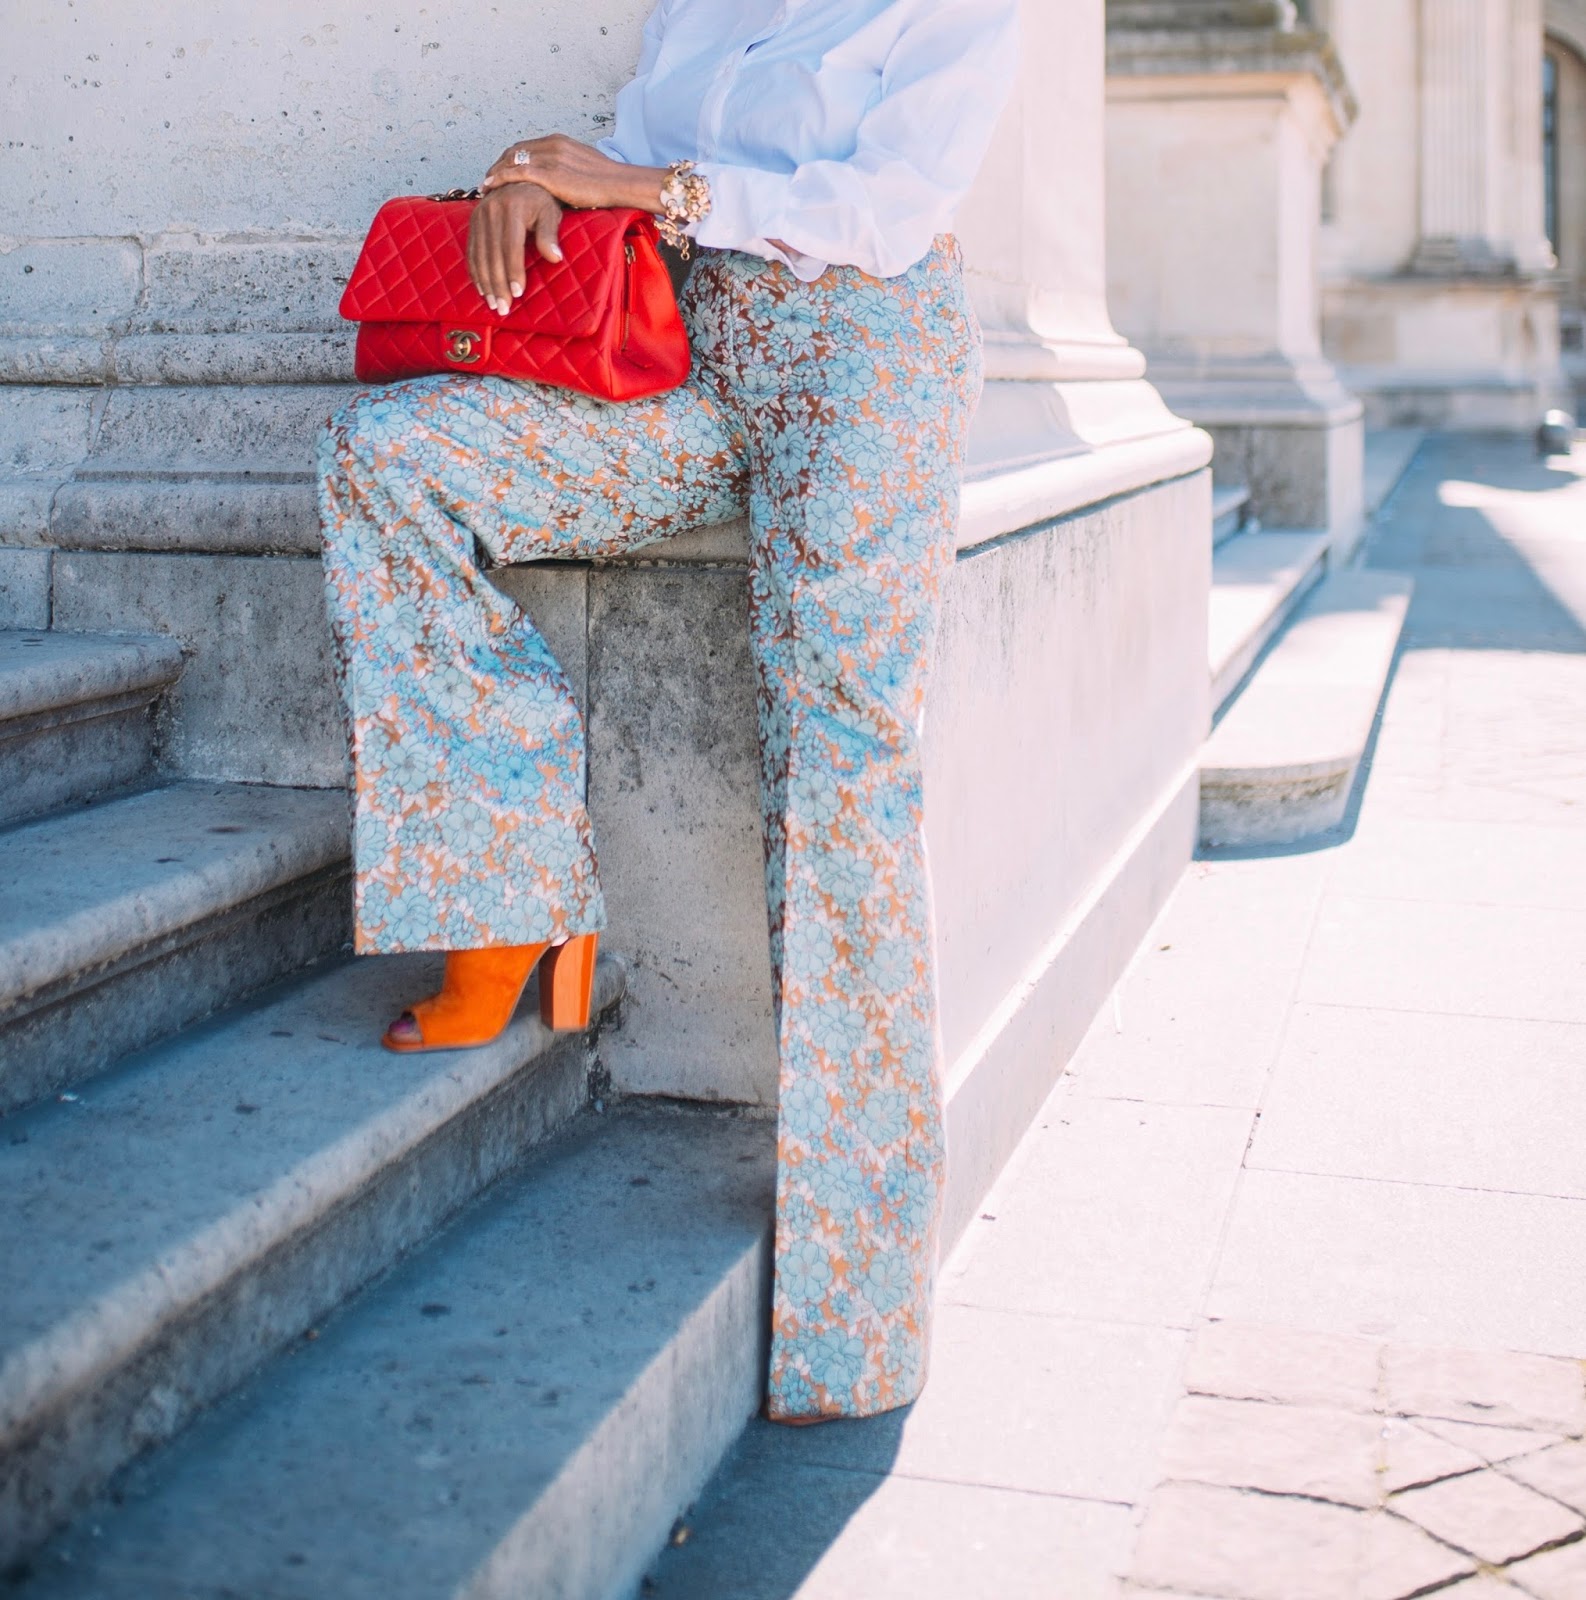 Floral jacquard pants with classic white shirt and boater hat